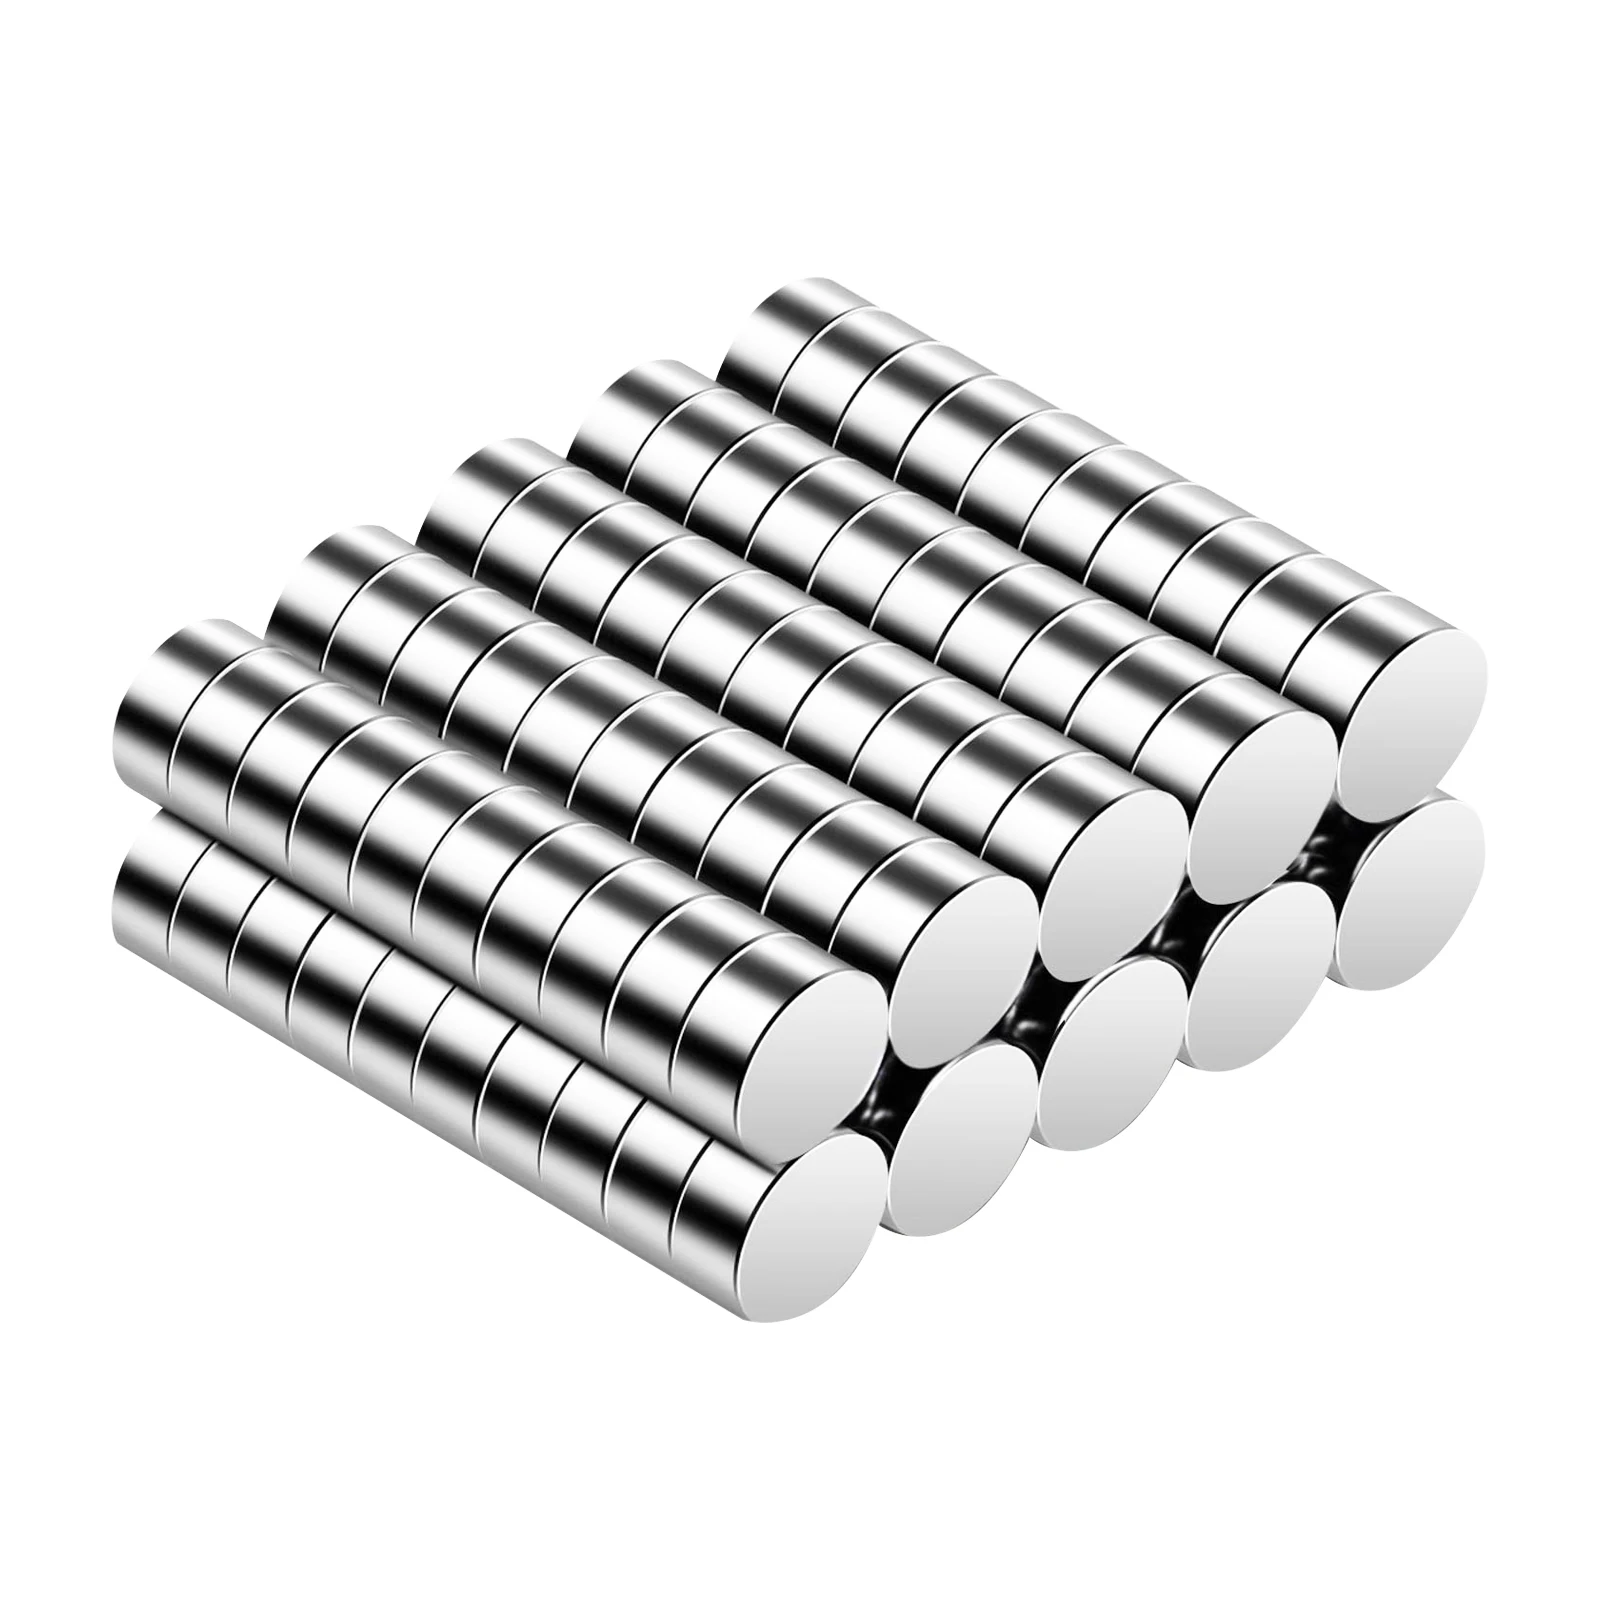 

10-500Pcs 5x2 Neodymium Magnet 5x2mm N38 NdFeB Permanent Small Round Super Powerful Strong Magnetic Magnets Disc 5*2mm